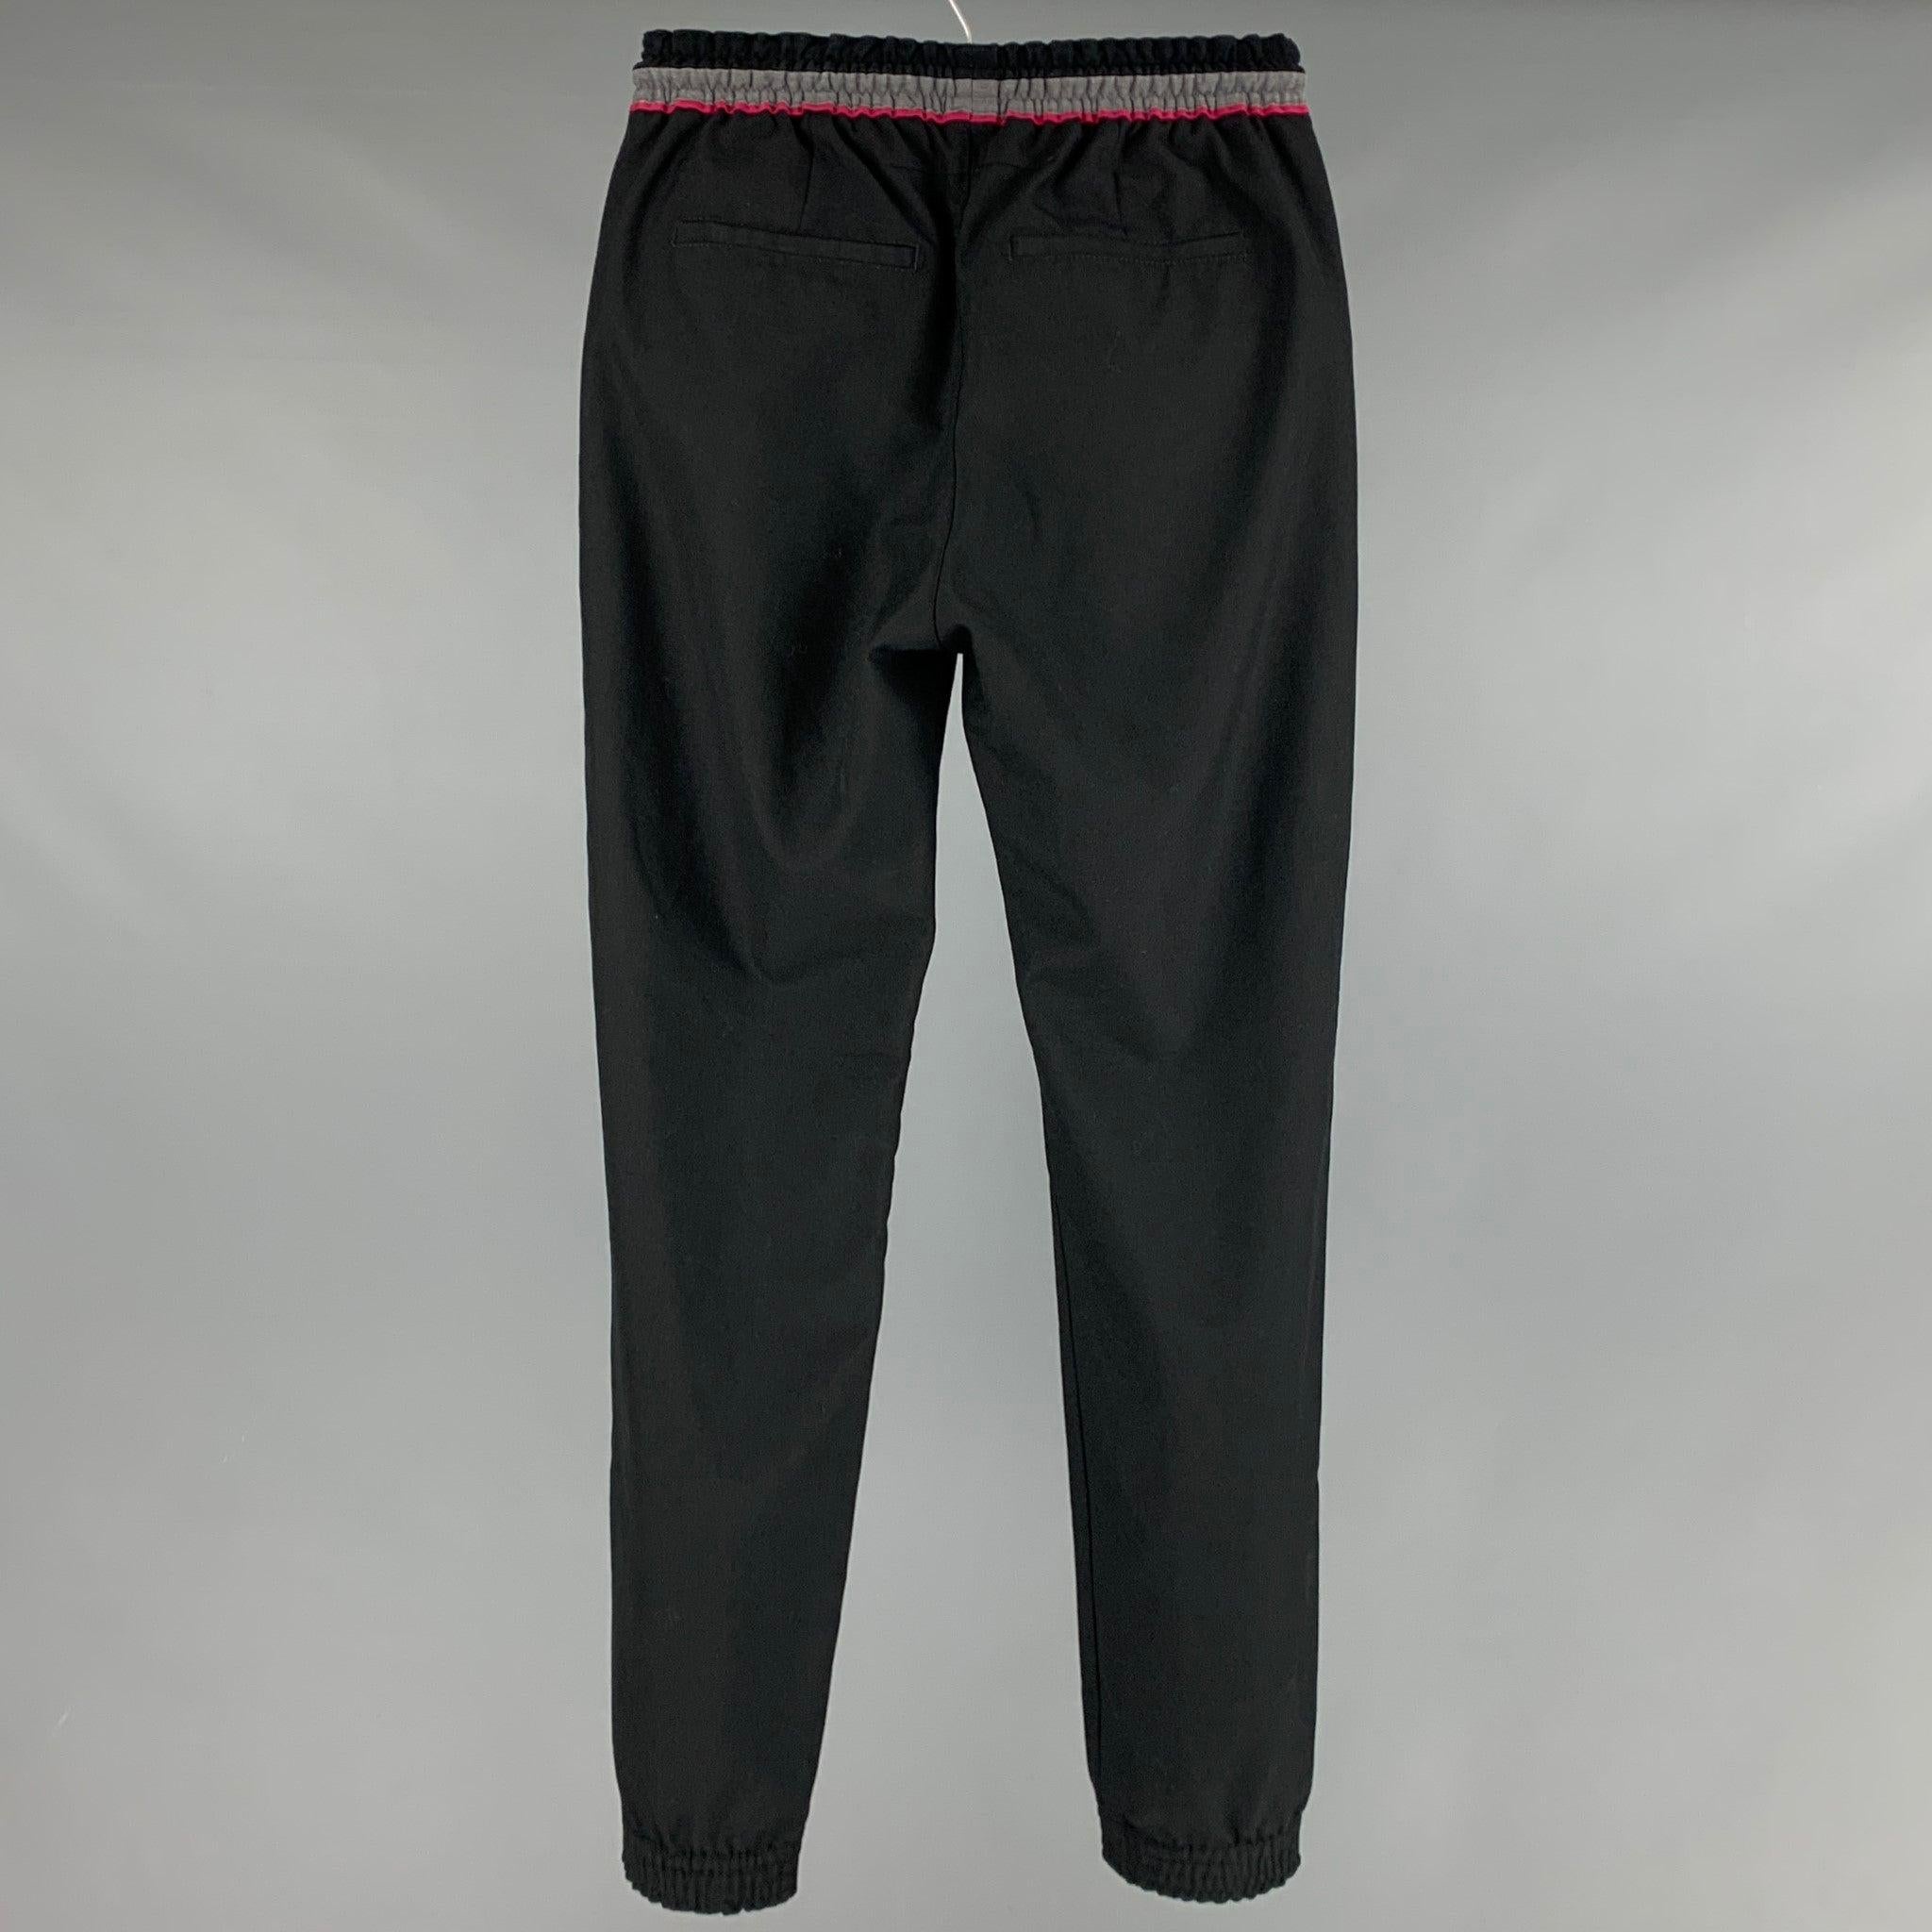 GIVENCHY sweatpants
in a black polyester wool blend fabric featuring zipper pockets, a drawstring waistband with grey and pink trim, and a zip fly closure. Made in Bulgaria.Very Good Pre-Owned Condition. Minor signs of wear. 

Marked:   44